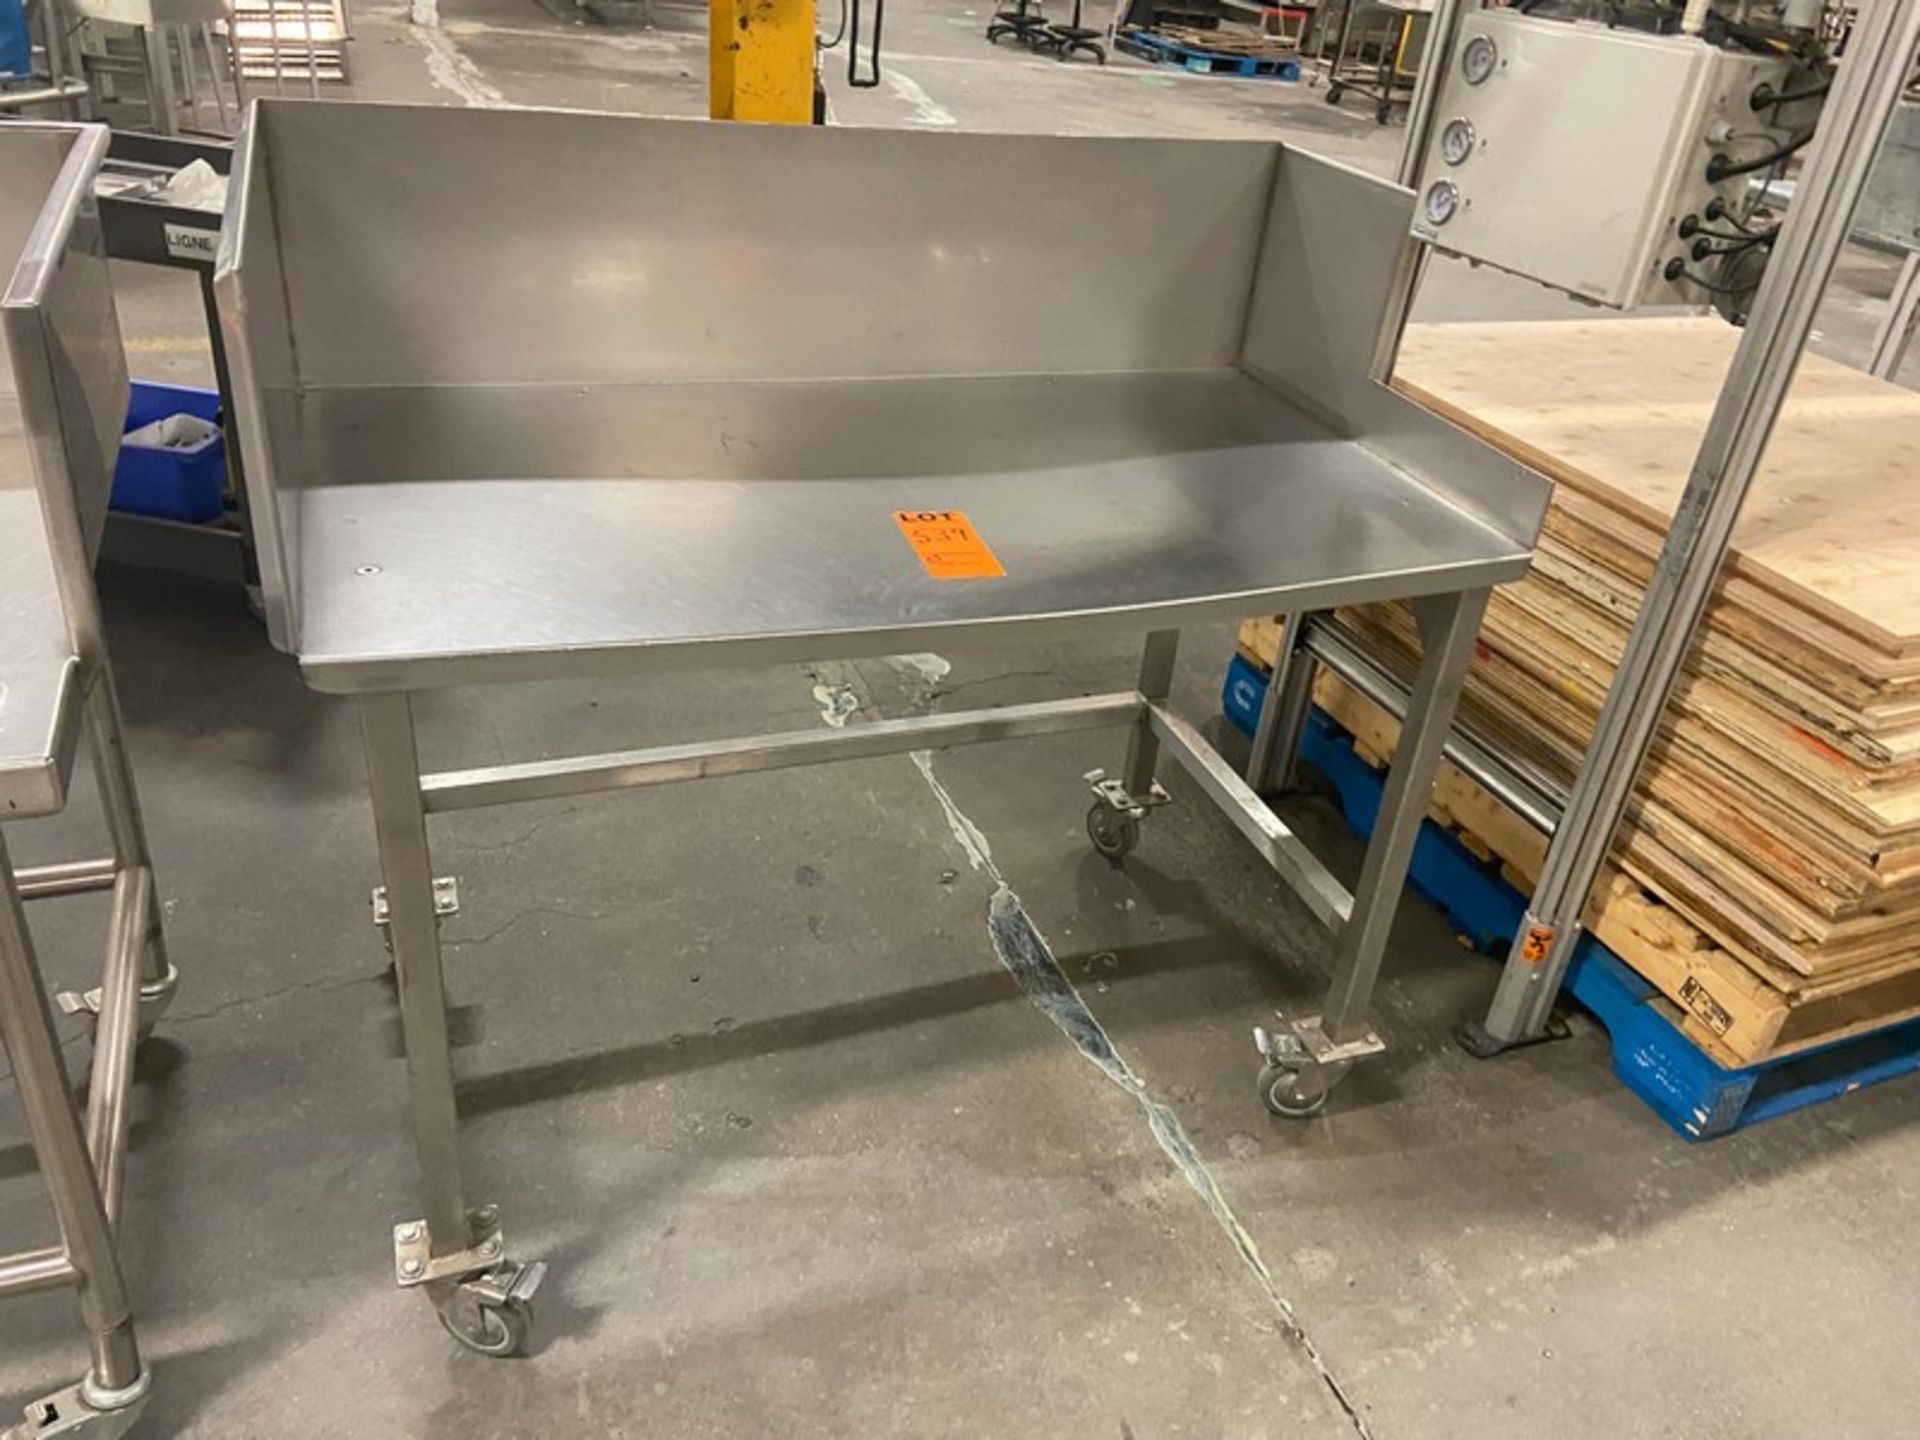 S/S Operator's Table, with S/S Side Walls S/S Back Splash, Mounted on S/S Frame with Casters (